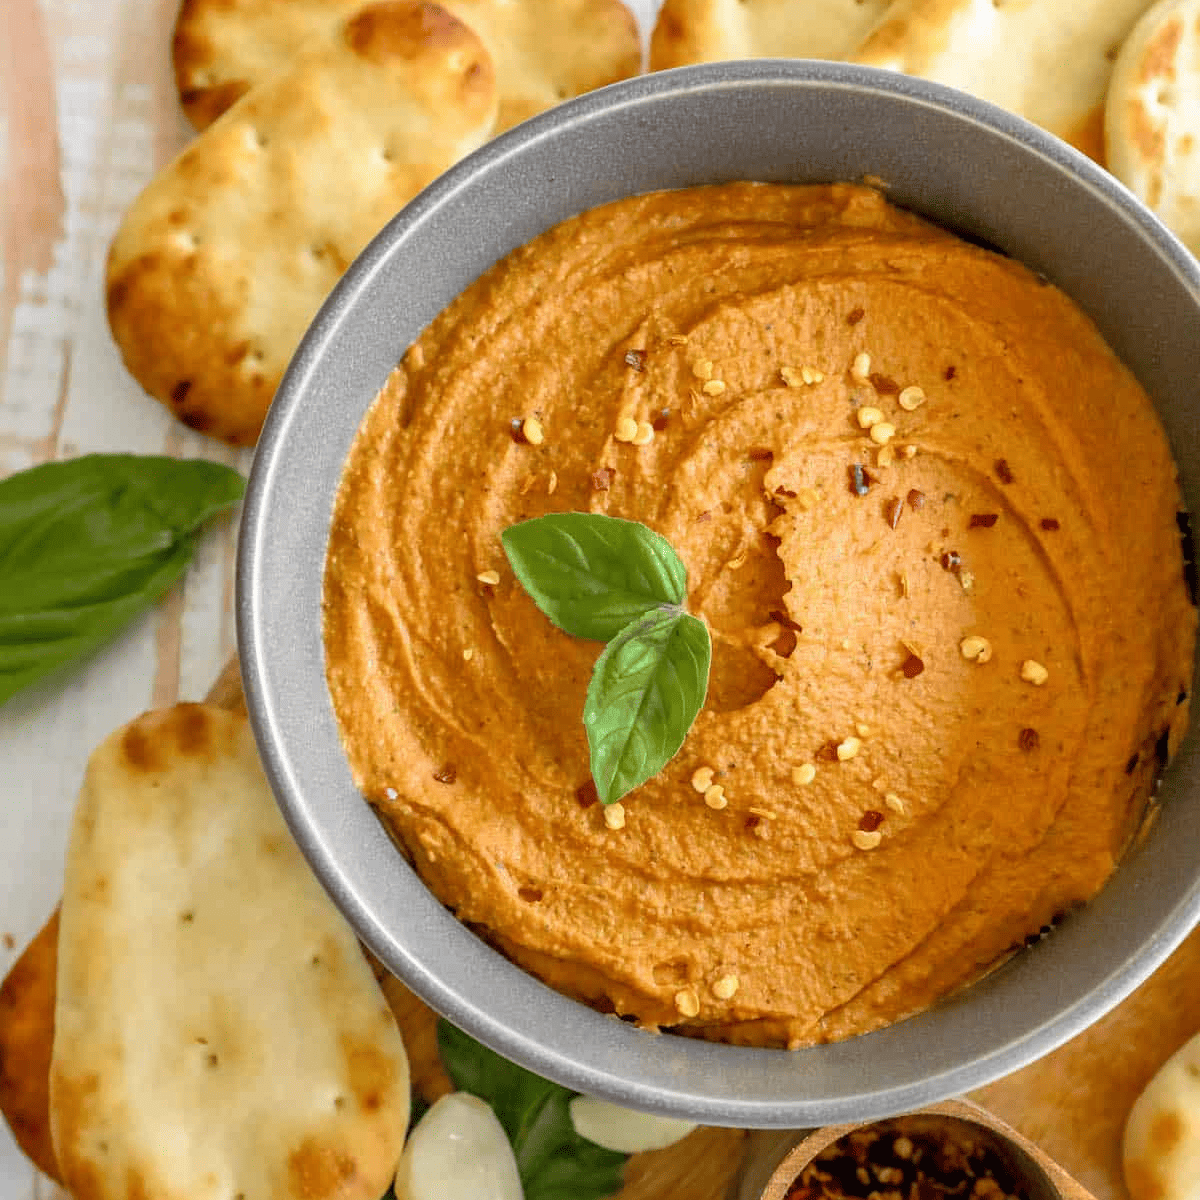 A delicious bowl of hummus layered with crackers and garnished with fragrant basil leaves.